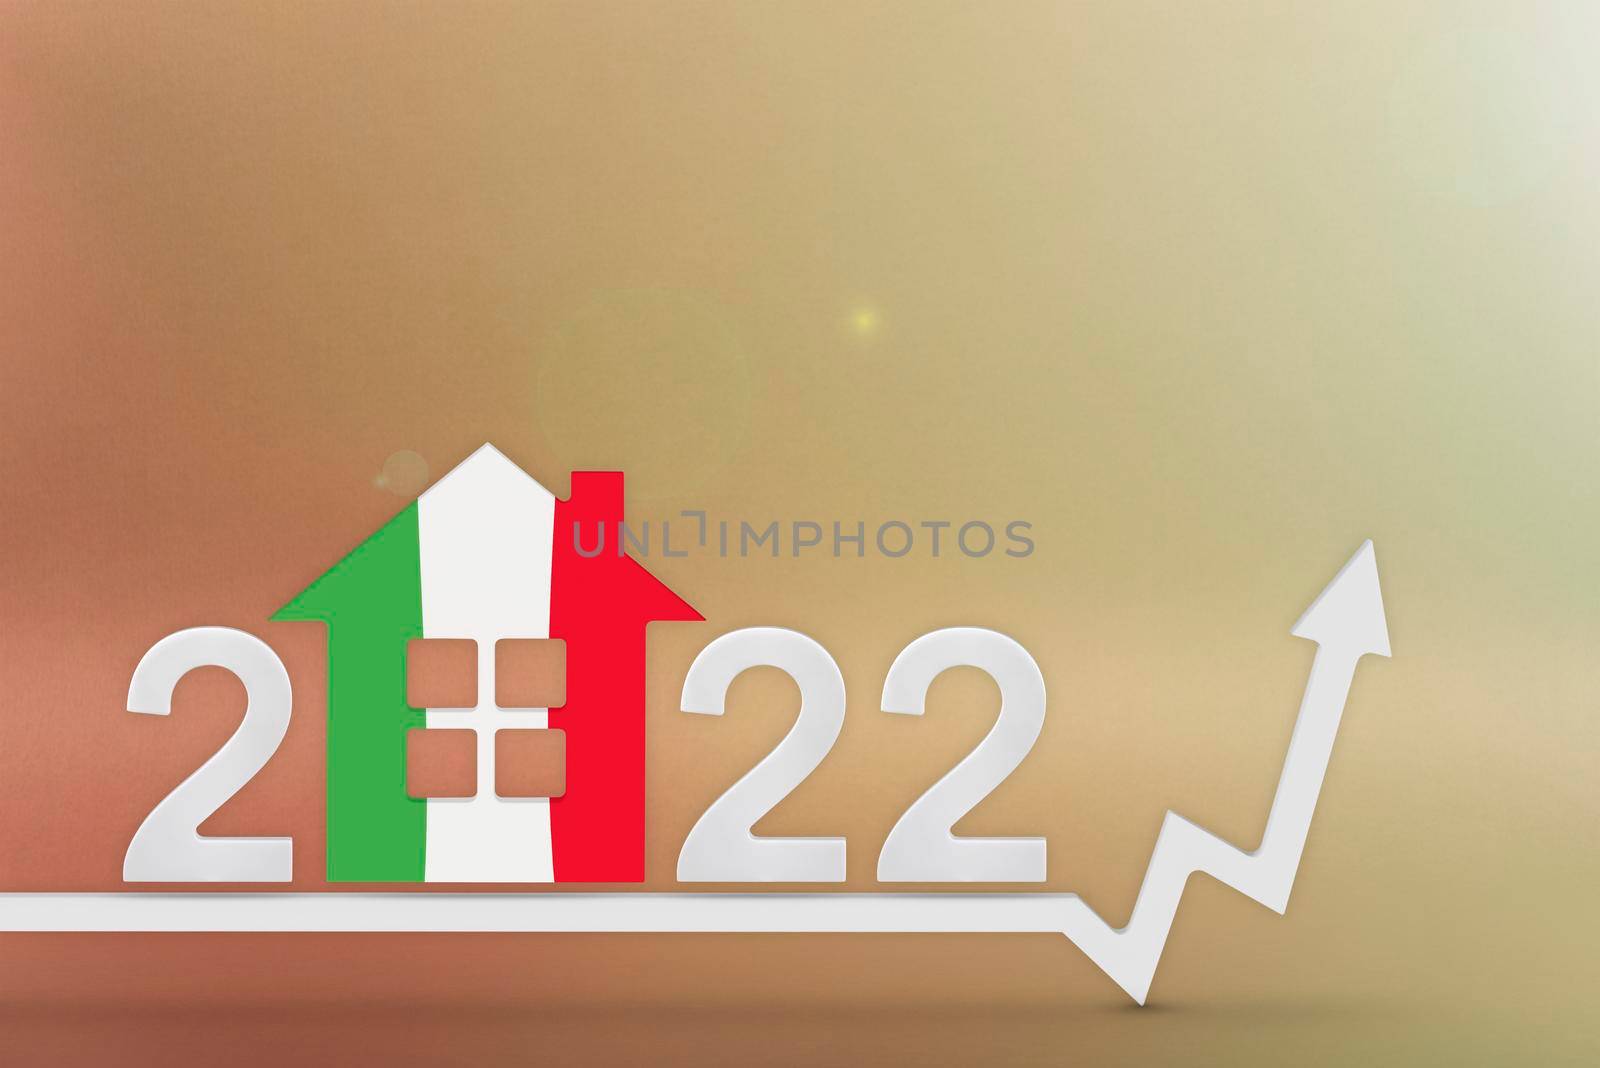 The cost of real estate in Italia in 2022. Rising cost of construction, insurance, rent in Italia. 3d House model painted in flag colors, up arrow on yellow background.